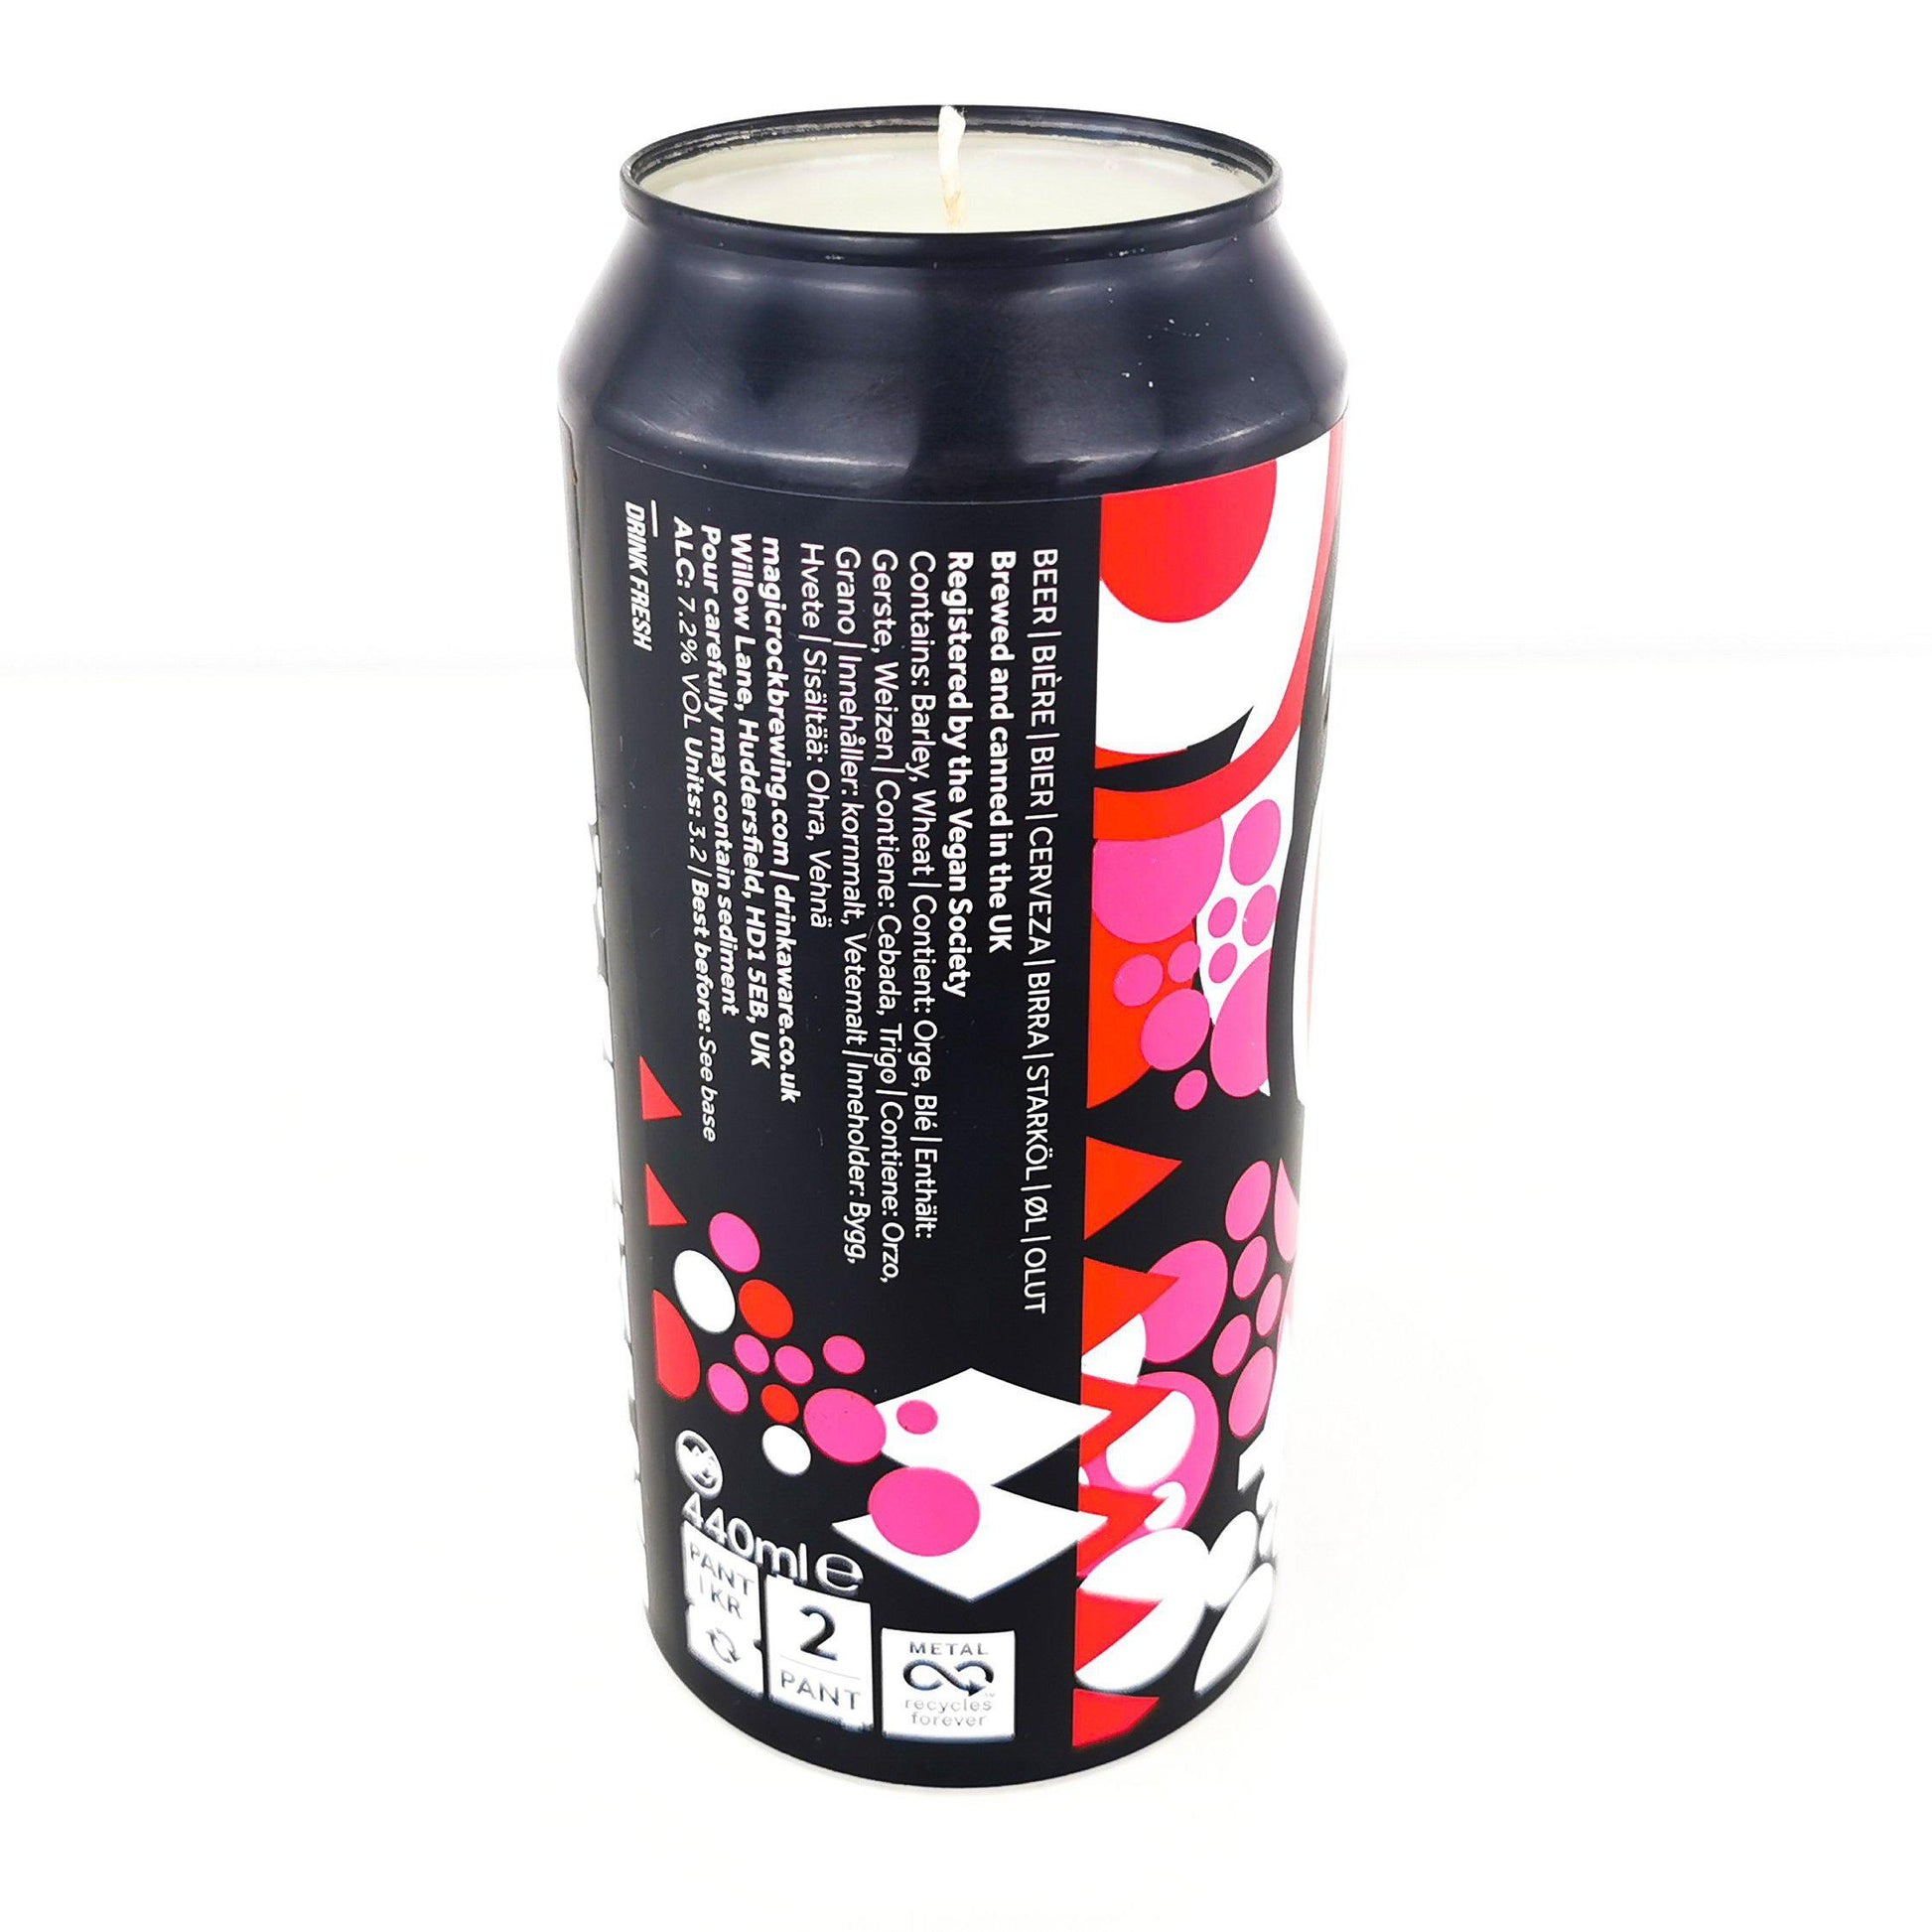 Magic Rock Clairvoyance DDH IPA Craft Beer Can Candle-Beer Can Candles-Adhock Homeware